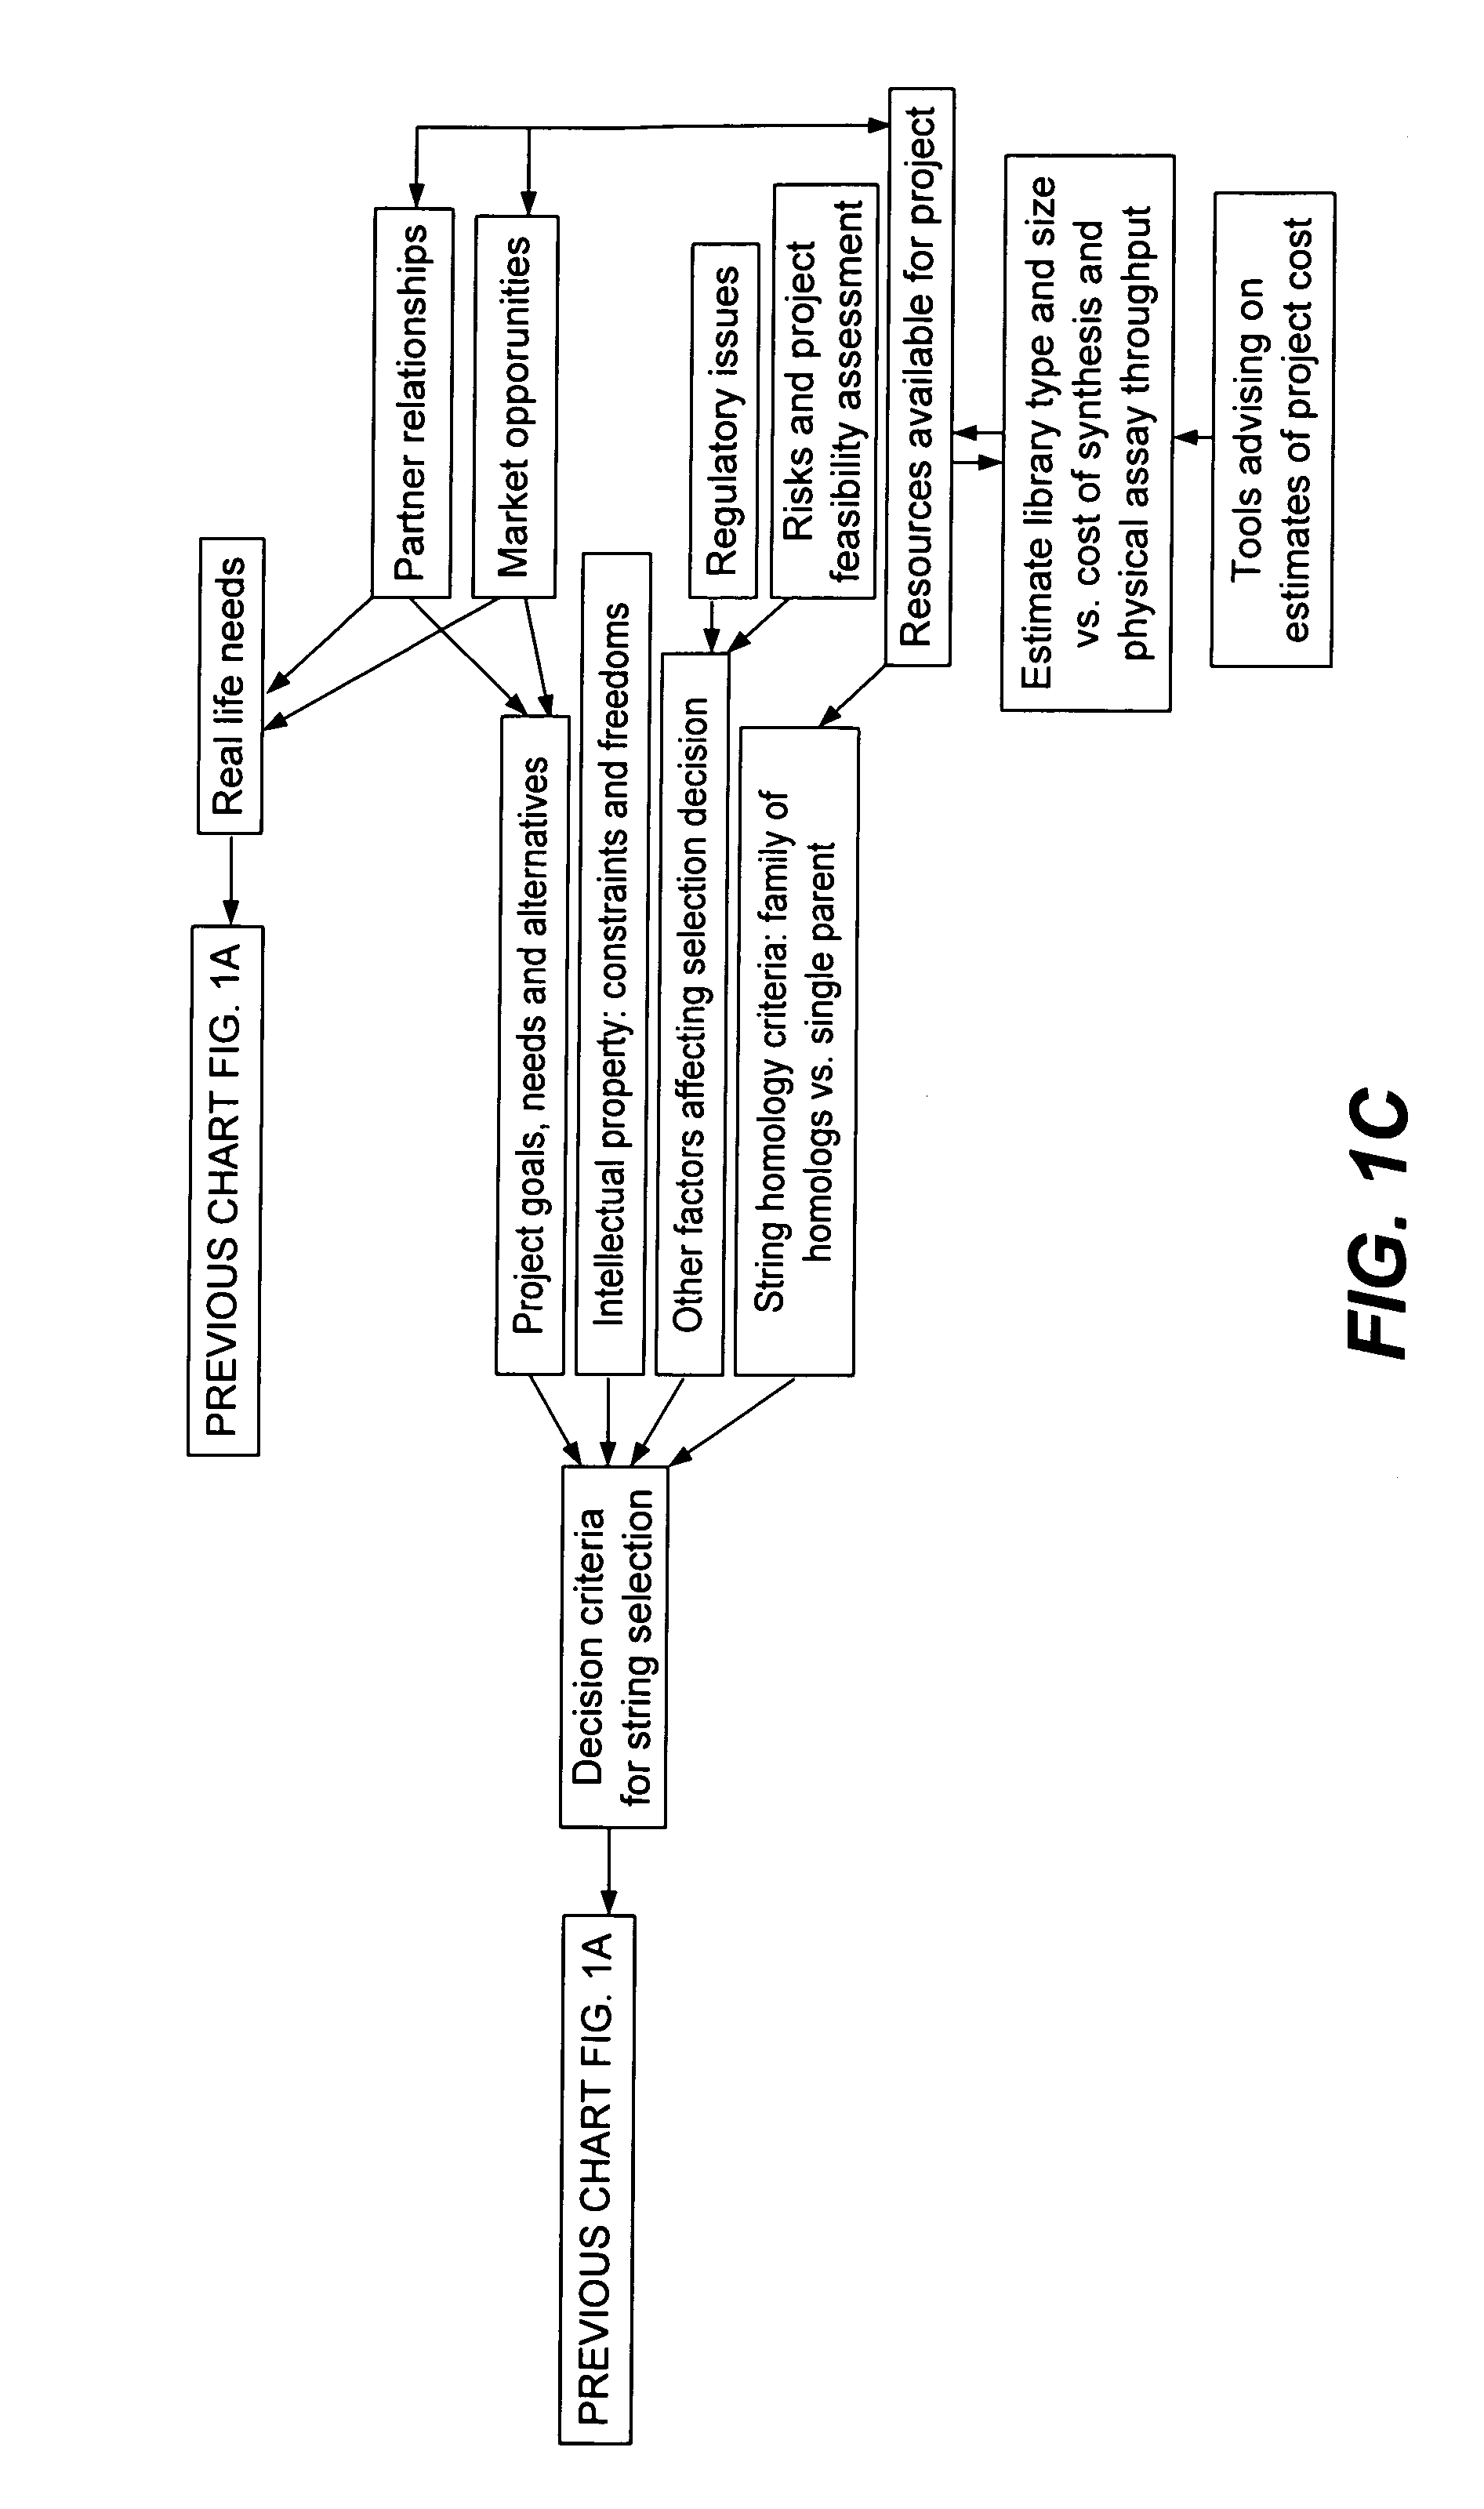 Methods for making character strings, polynucleotides and polypeptides having desired characteristics